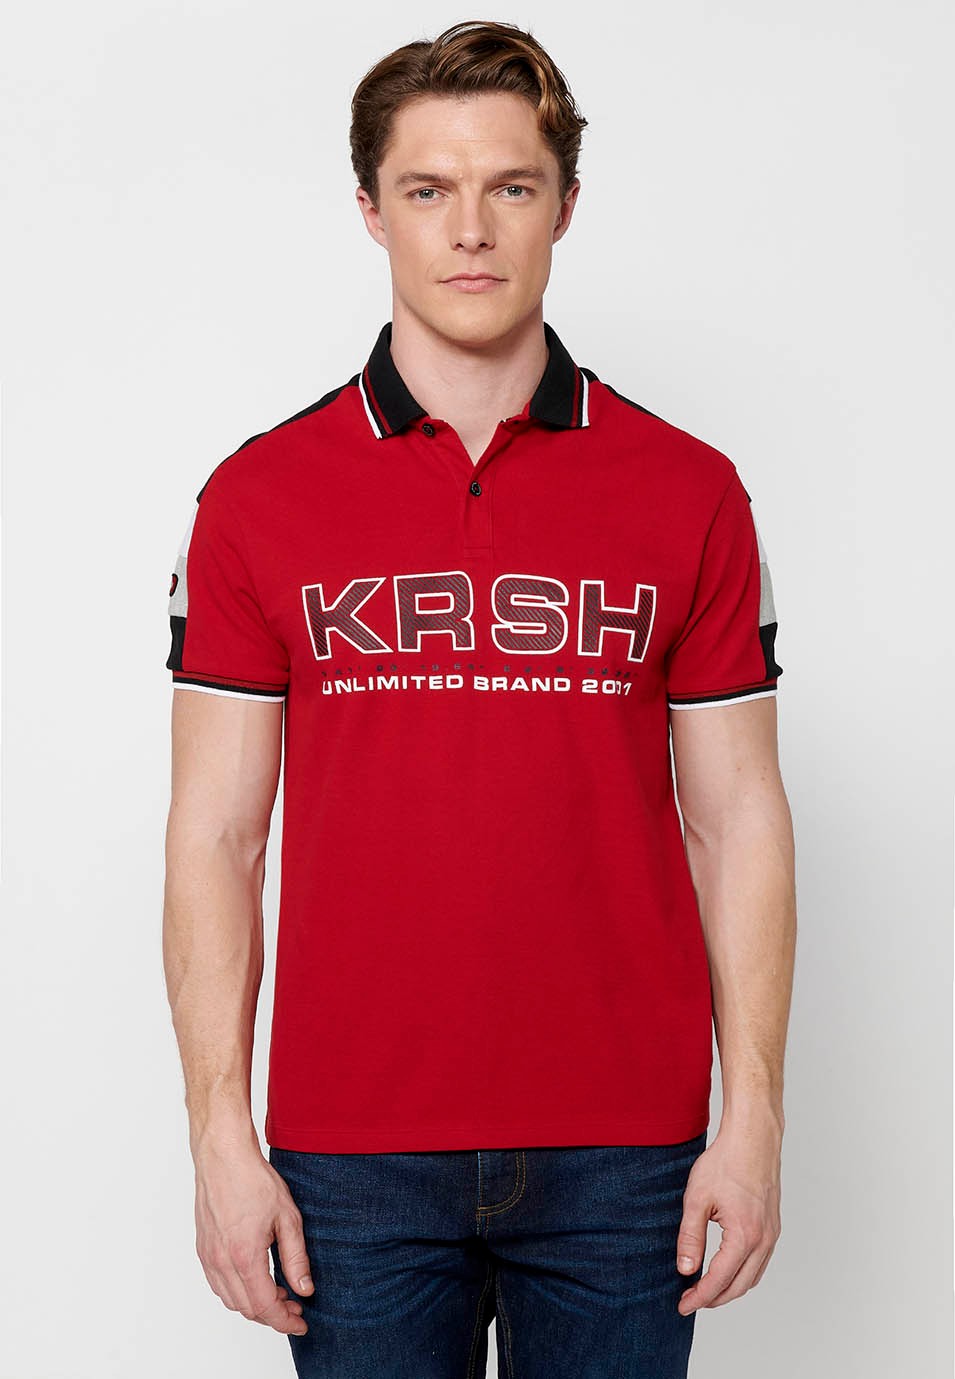 Short-sleeved cotton polo shirt with shirt collar with buttons and front detail with sleeves finished in rib and finished with side slits in Red for Men 2